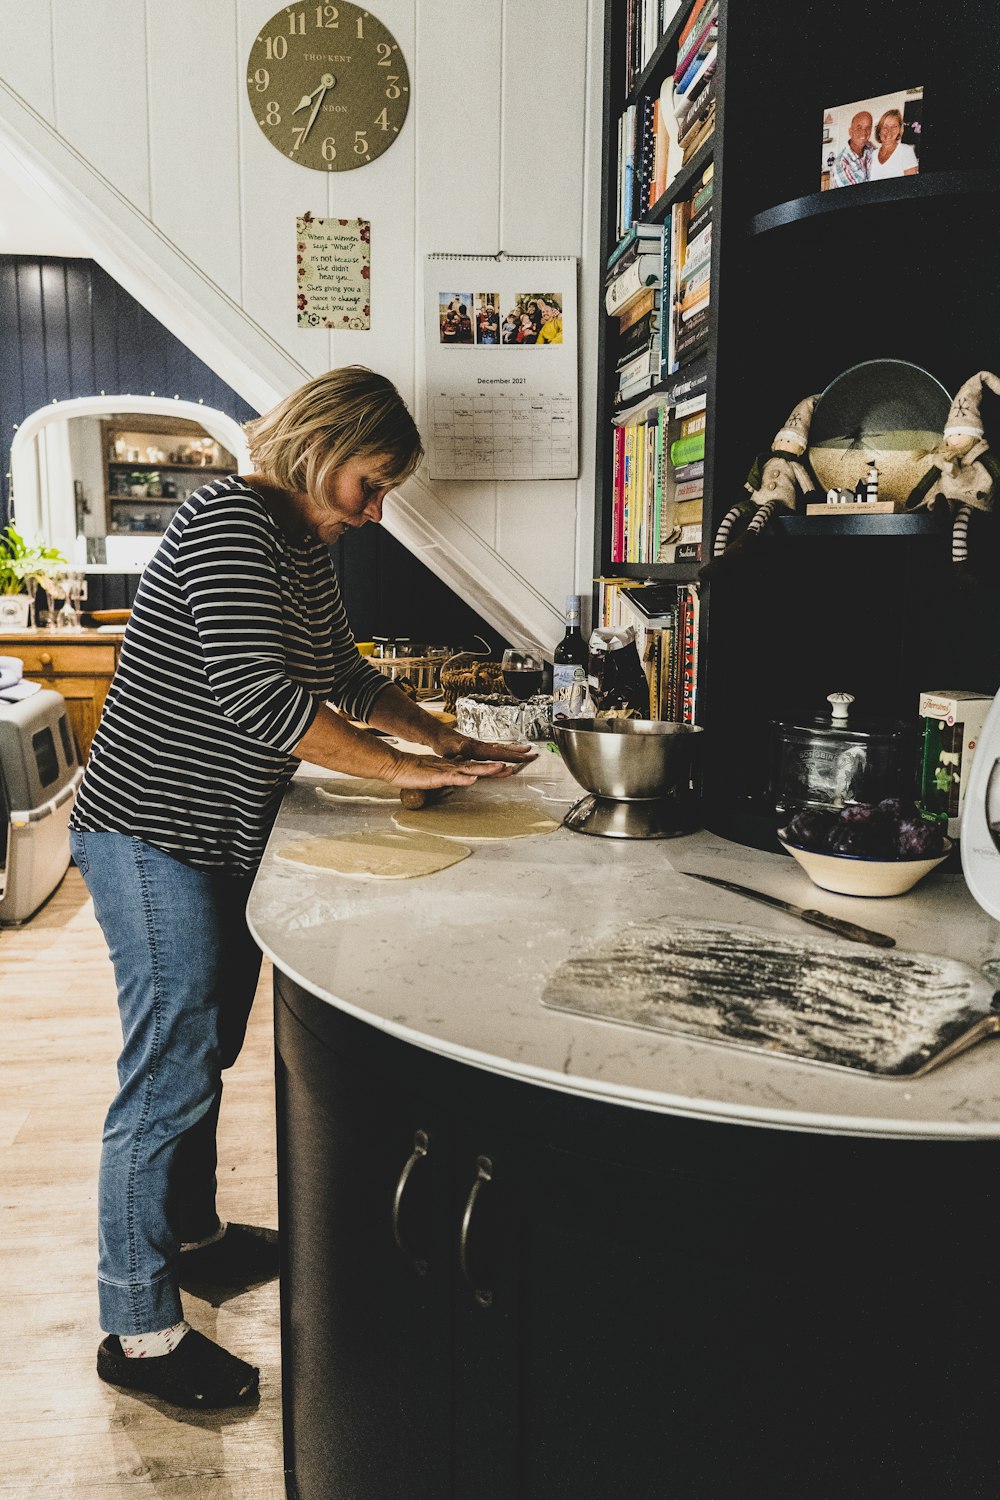 a woman standing in a kitchen preparing food